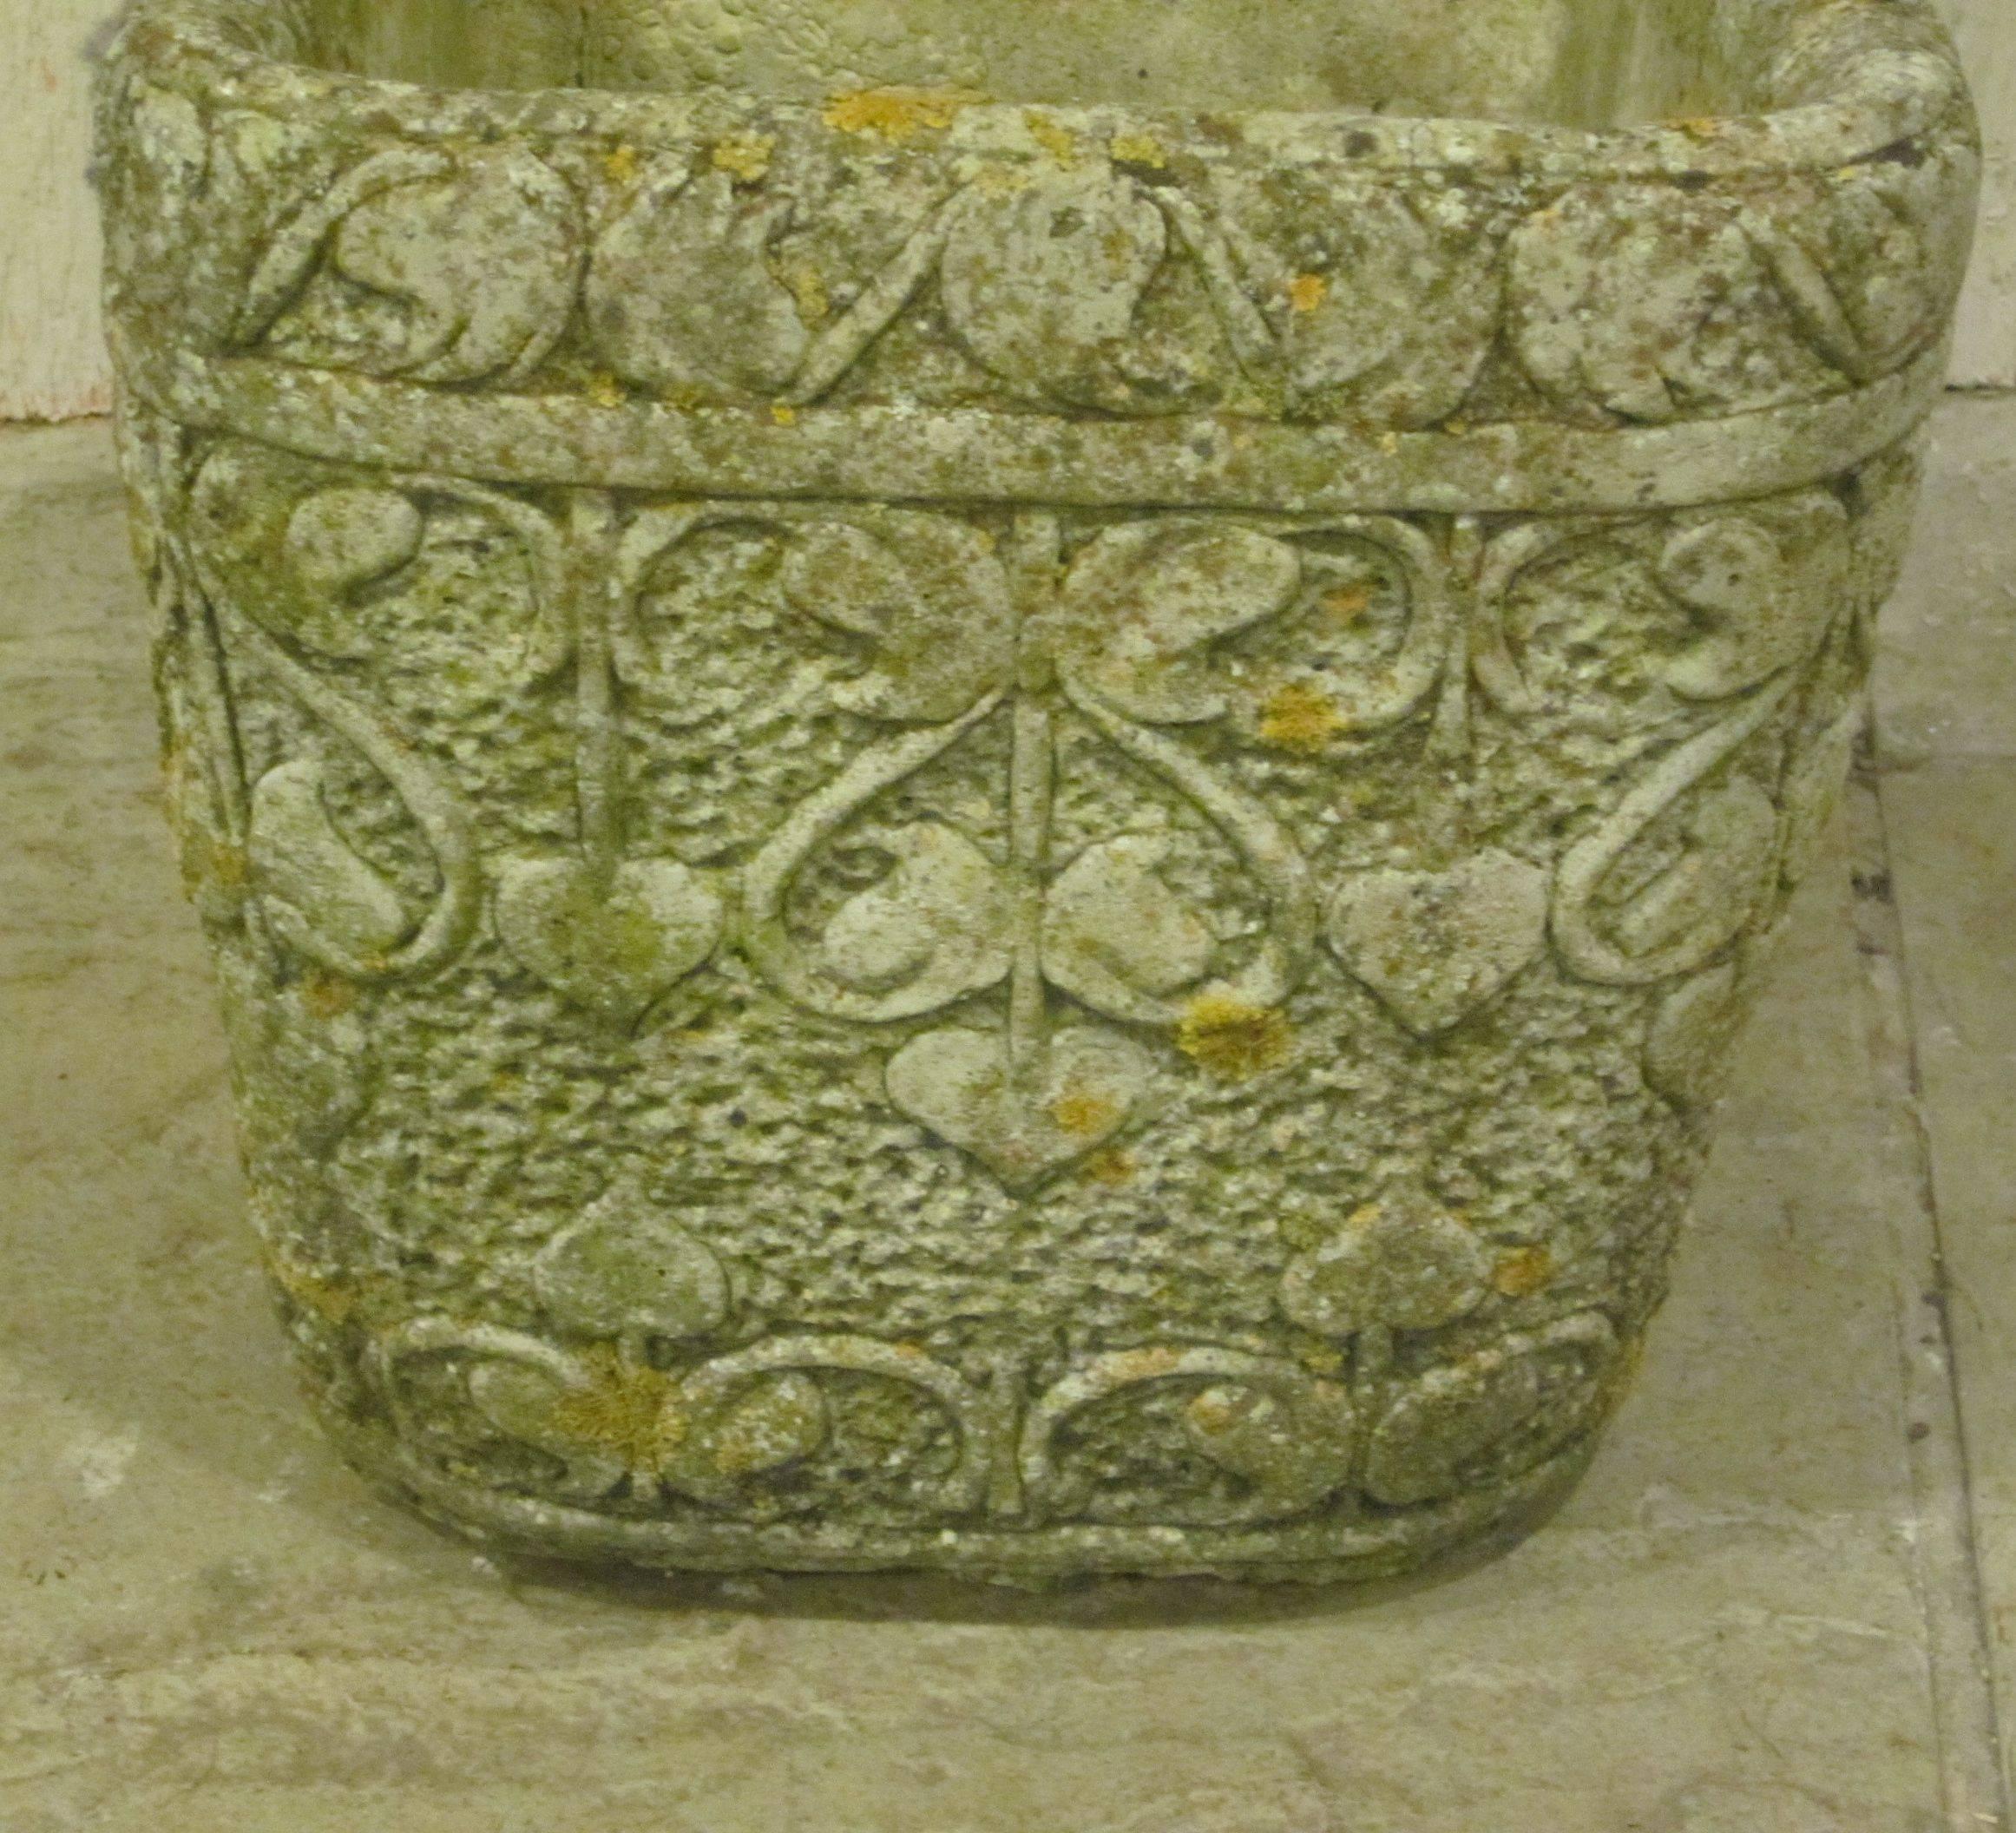 1920s English pair of square stone pots with decorative carvings.
Height is approximate and will be confirmed.